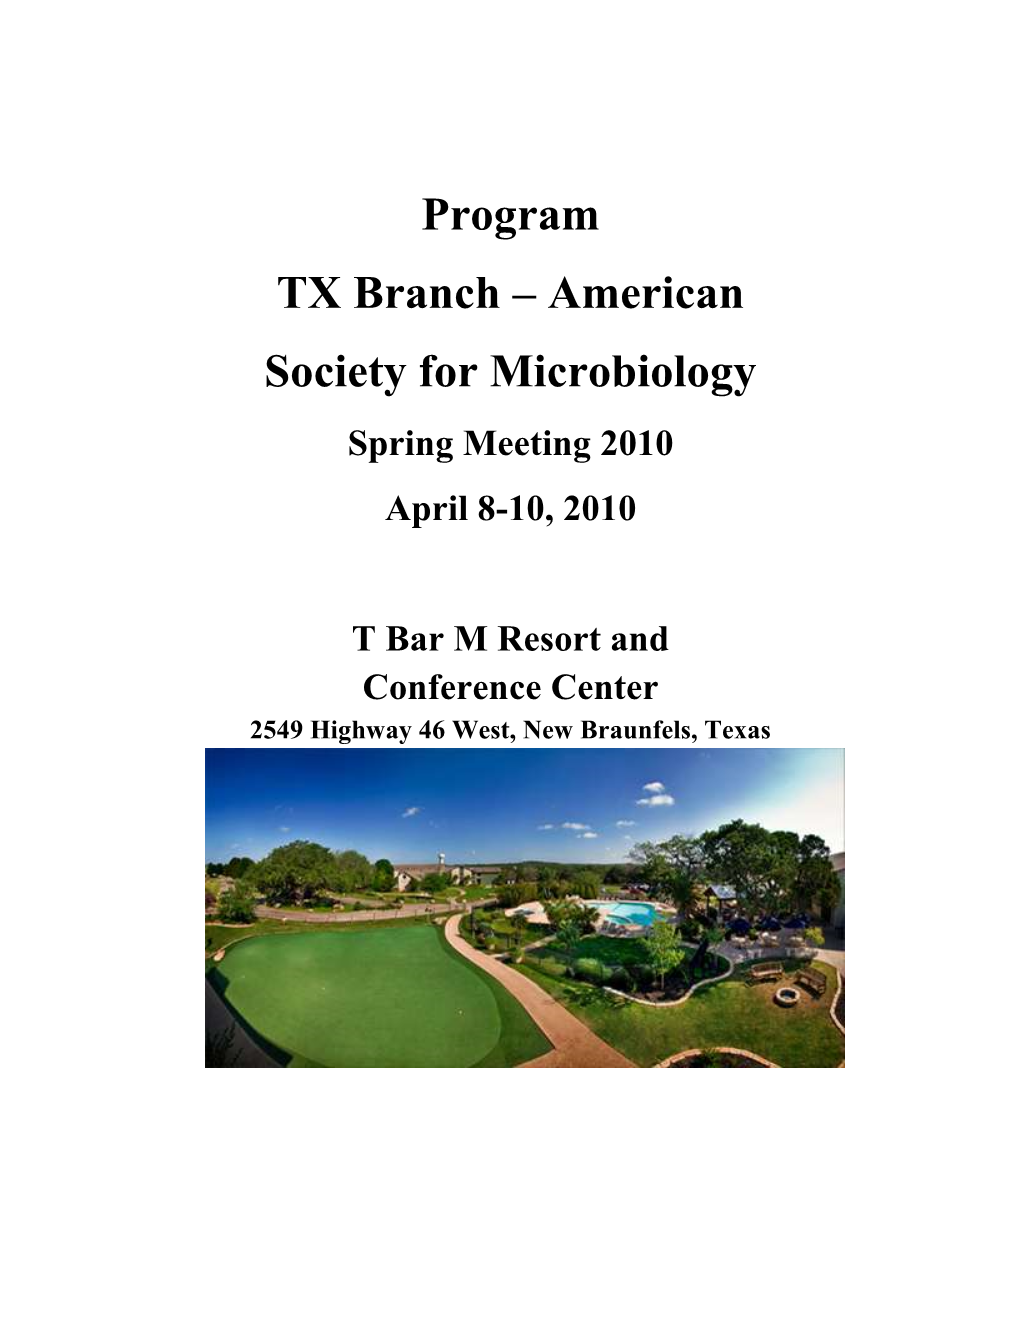 Program TX Branch – American Society for Microbiology Spring Meeting 2010 April 8-10, 2010